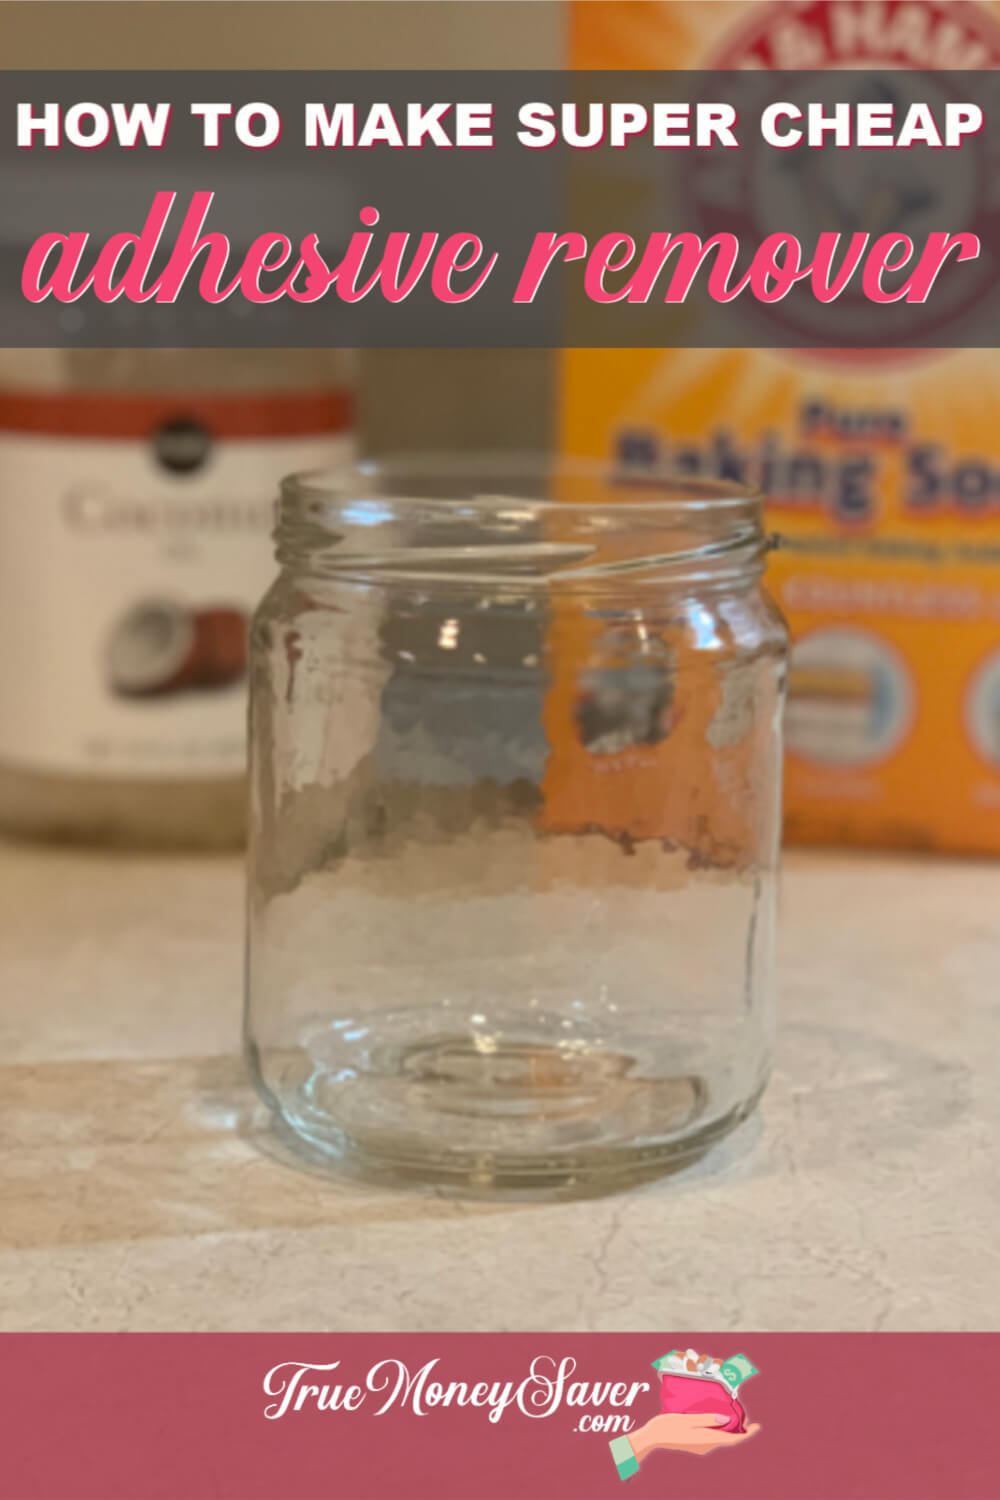 How To Make DIY Adhesive Remover - Just 2 Ingredients